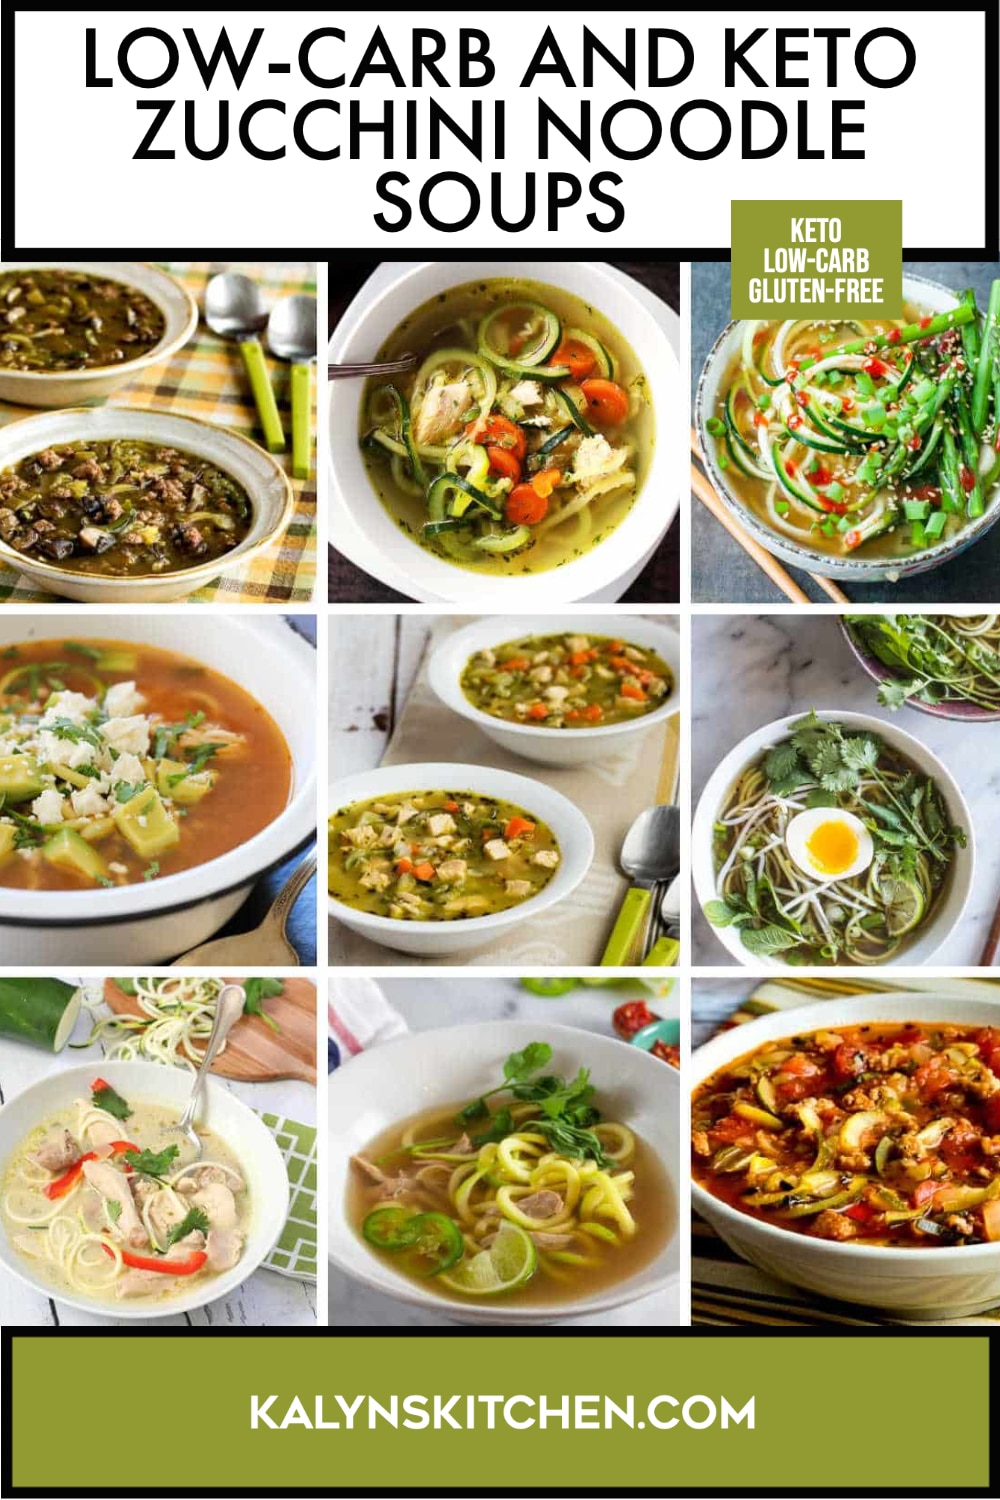 Pinterest image of Low-Carb and Keto Zucchini Noodle Soups